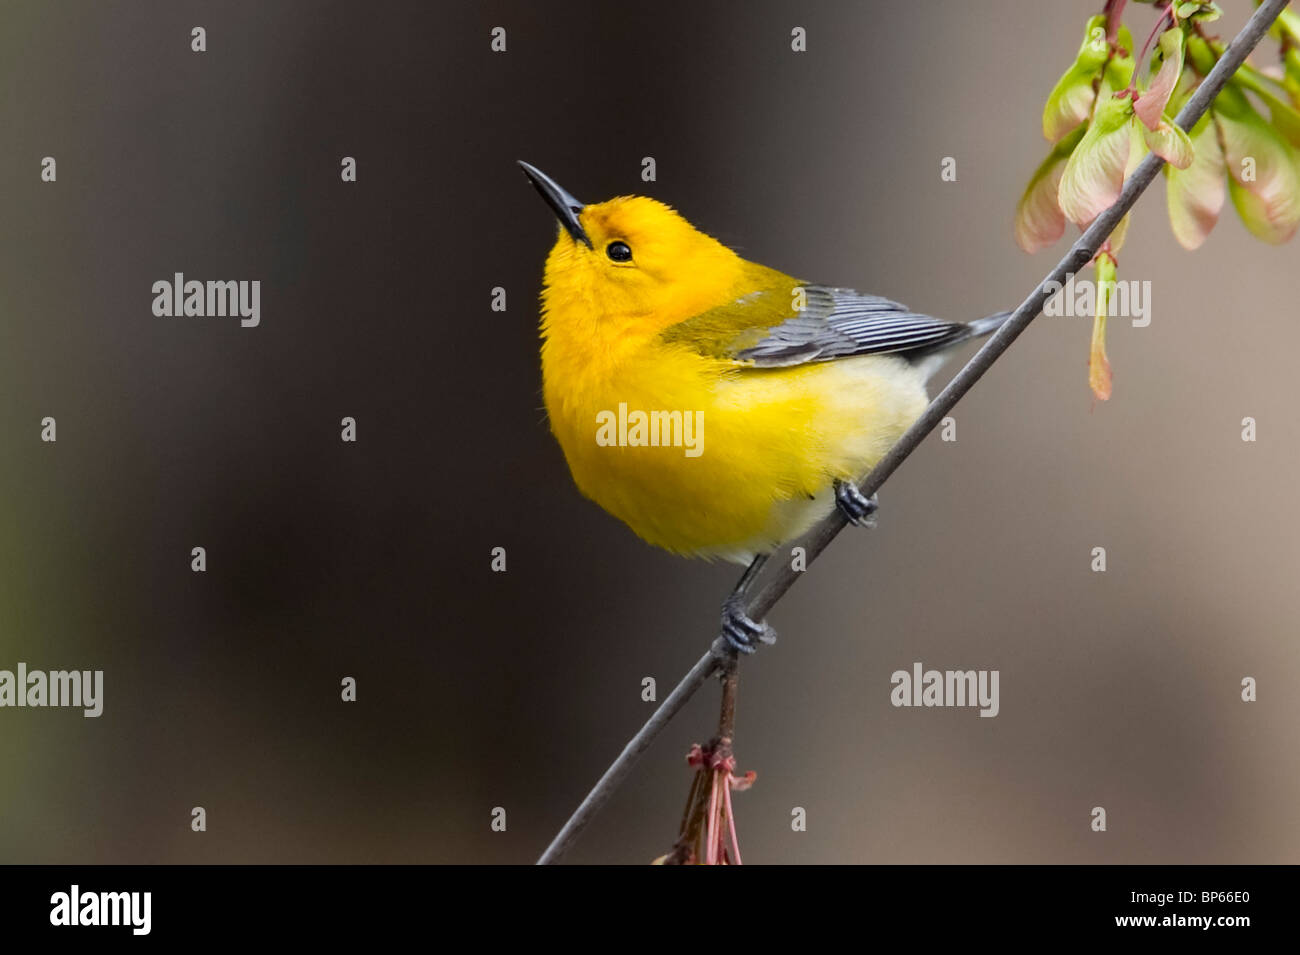 Adult Male Prothonotary Warbler Perched Stock Photo